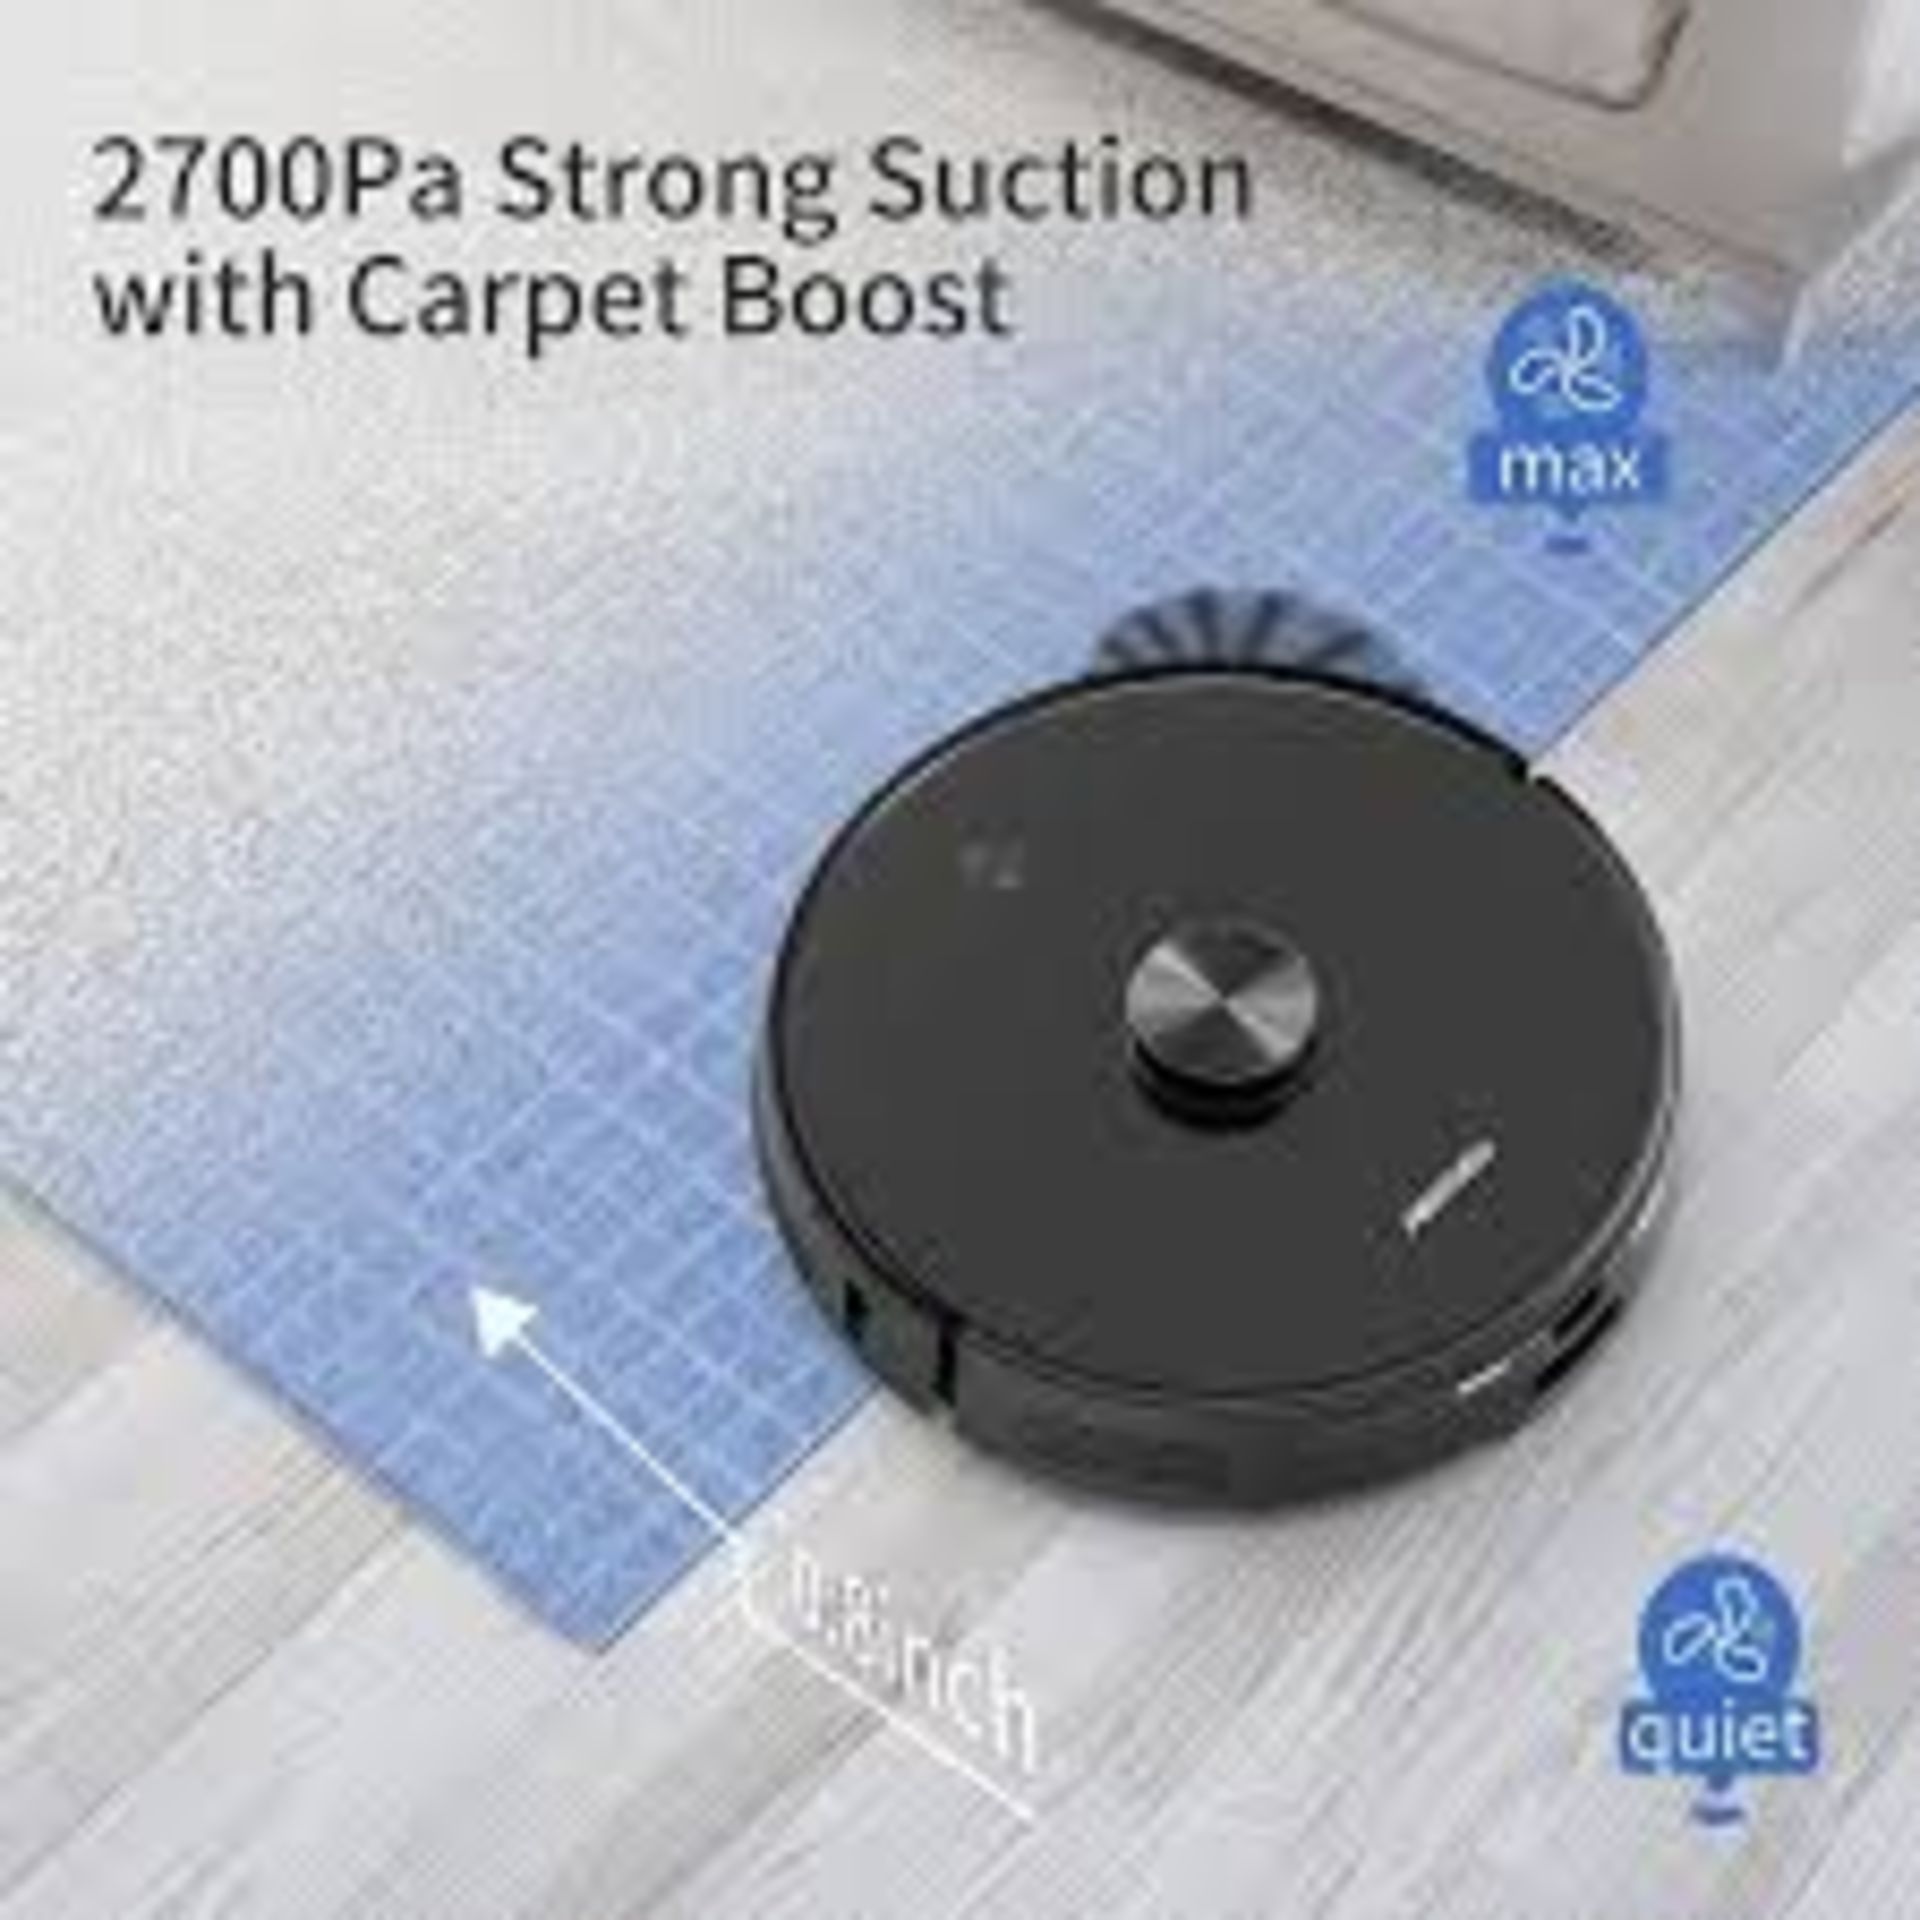 AIRROBO T10+ Robot Vacuum Cleaner with Mop Self Emptying,. - PW.